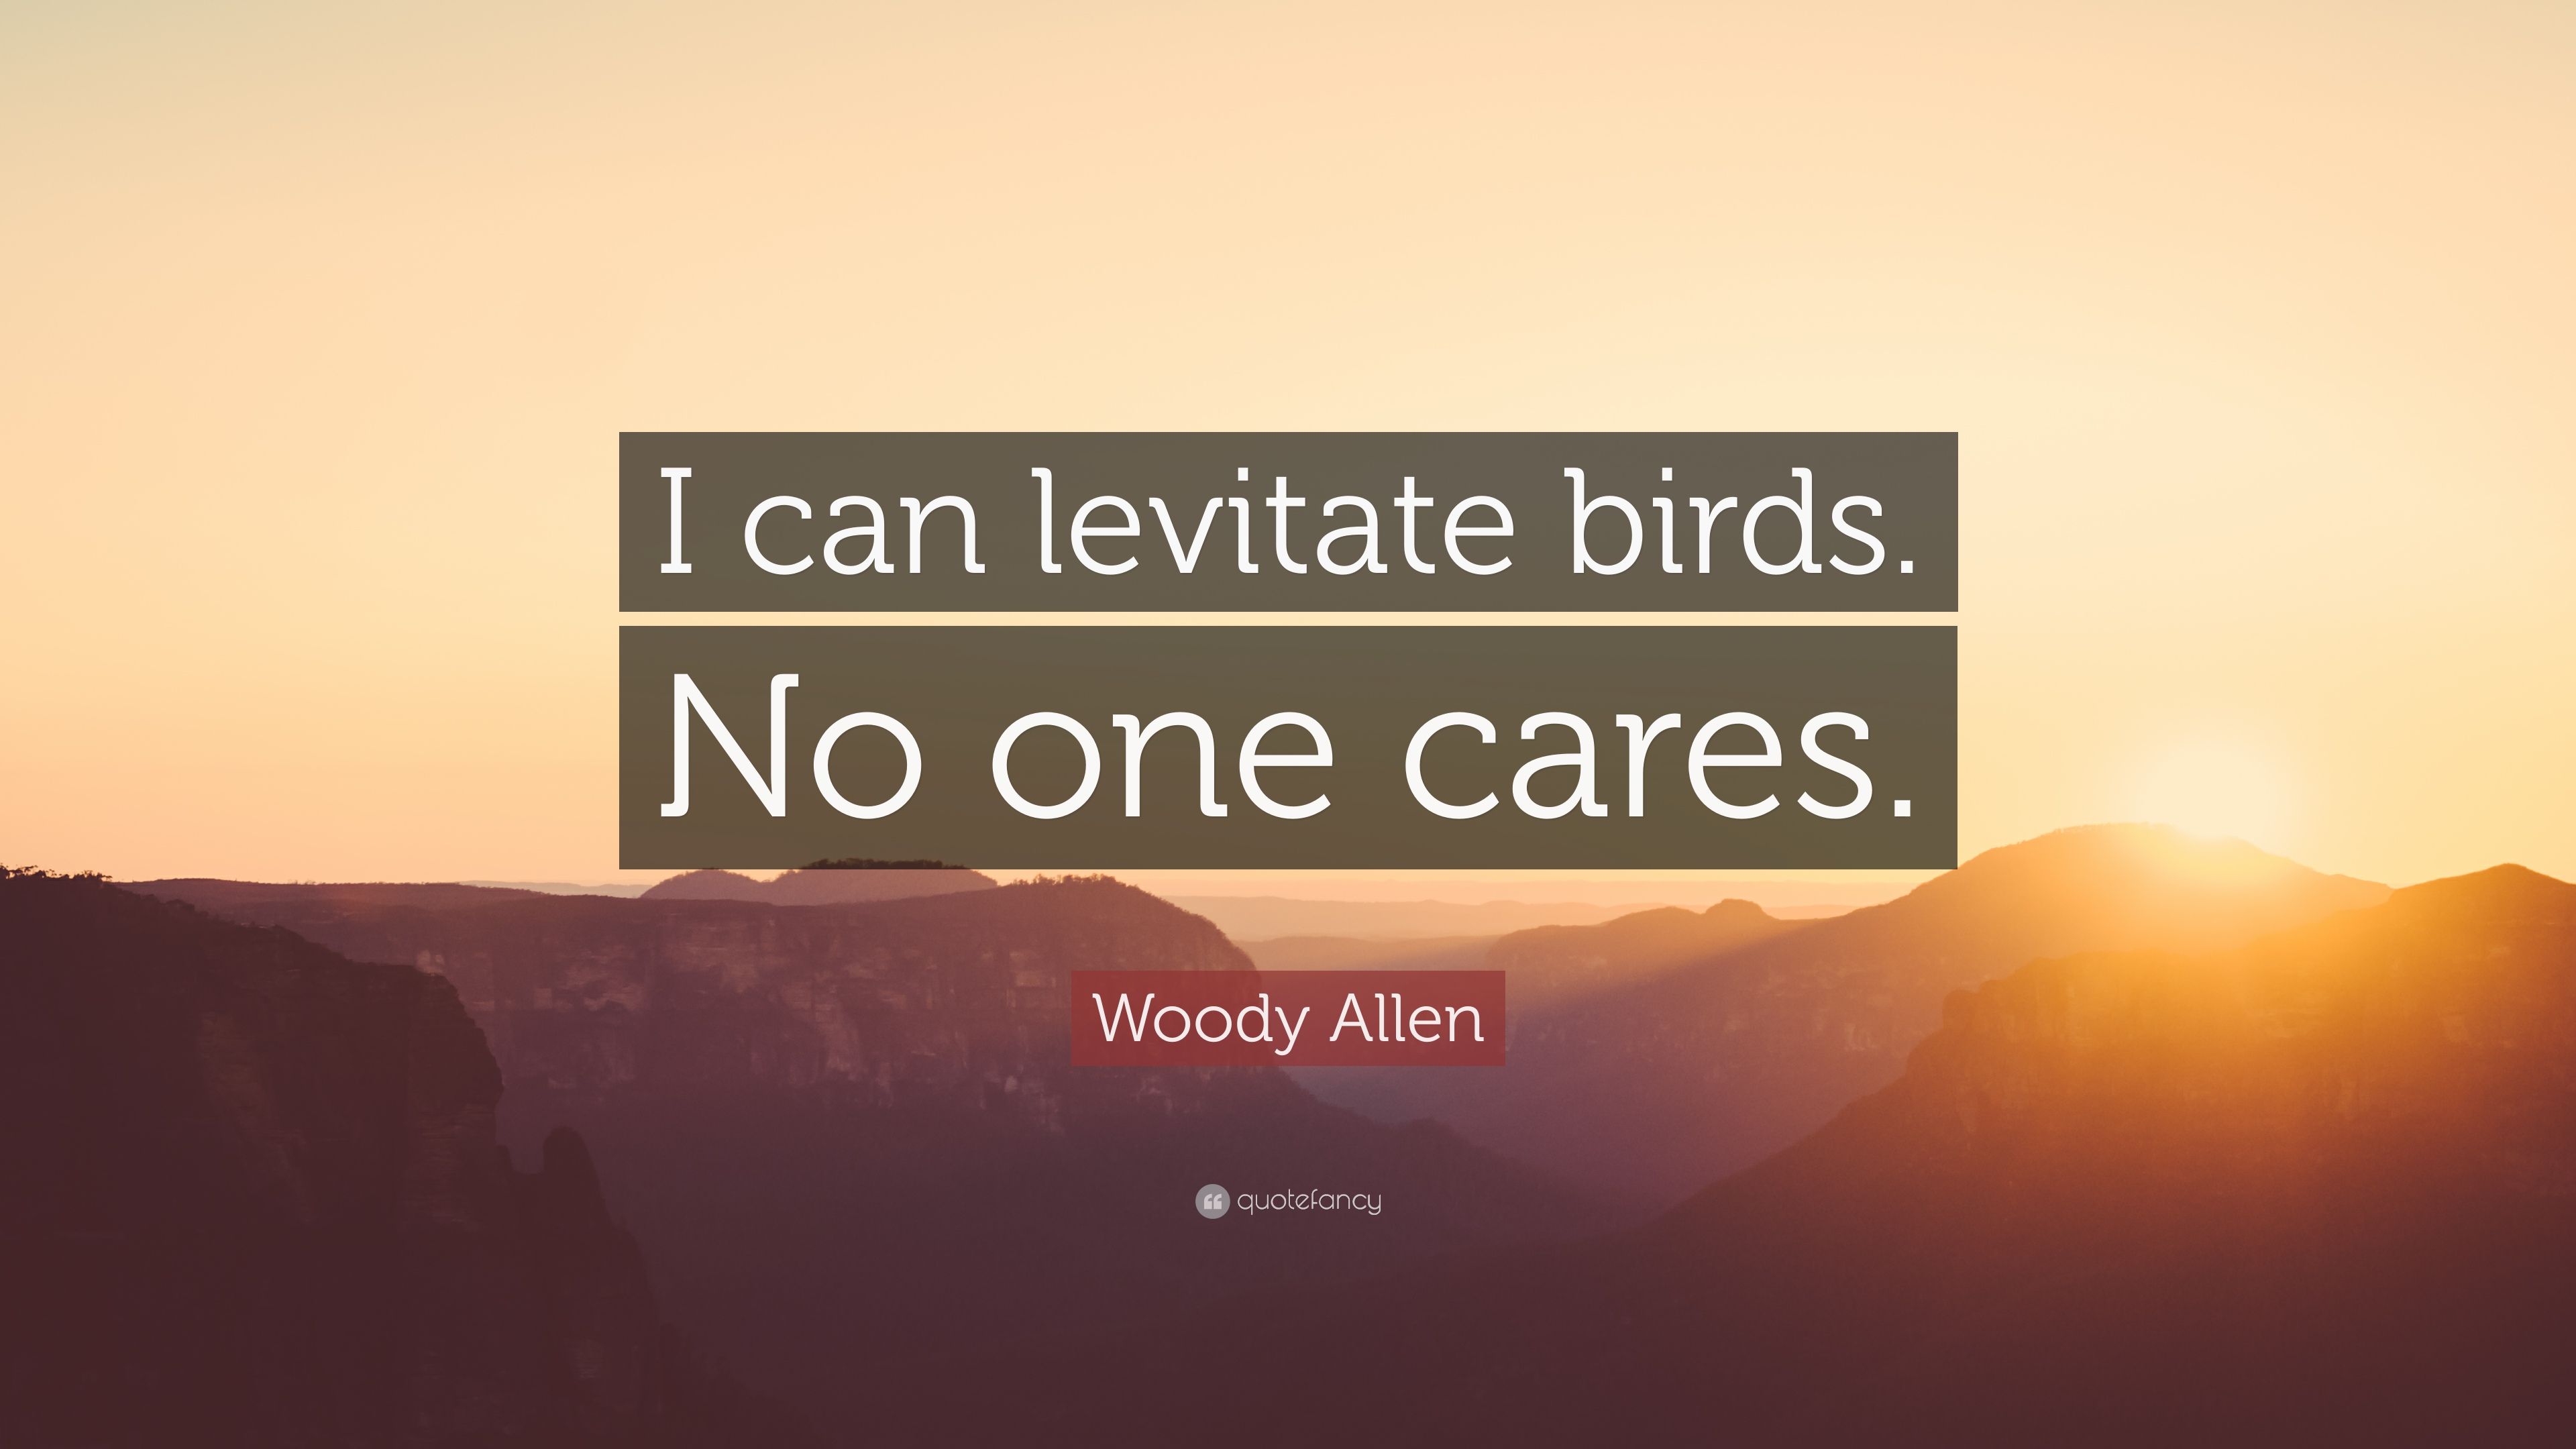 Woody Allen Quote: “I can levitate birds. No one cares.” (10 wallpaper)